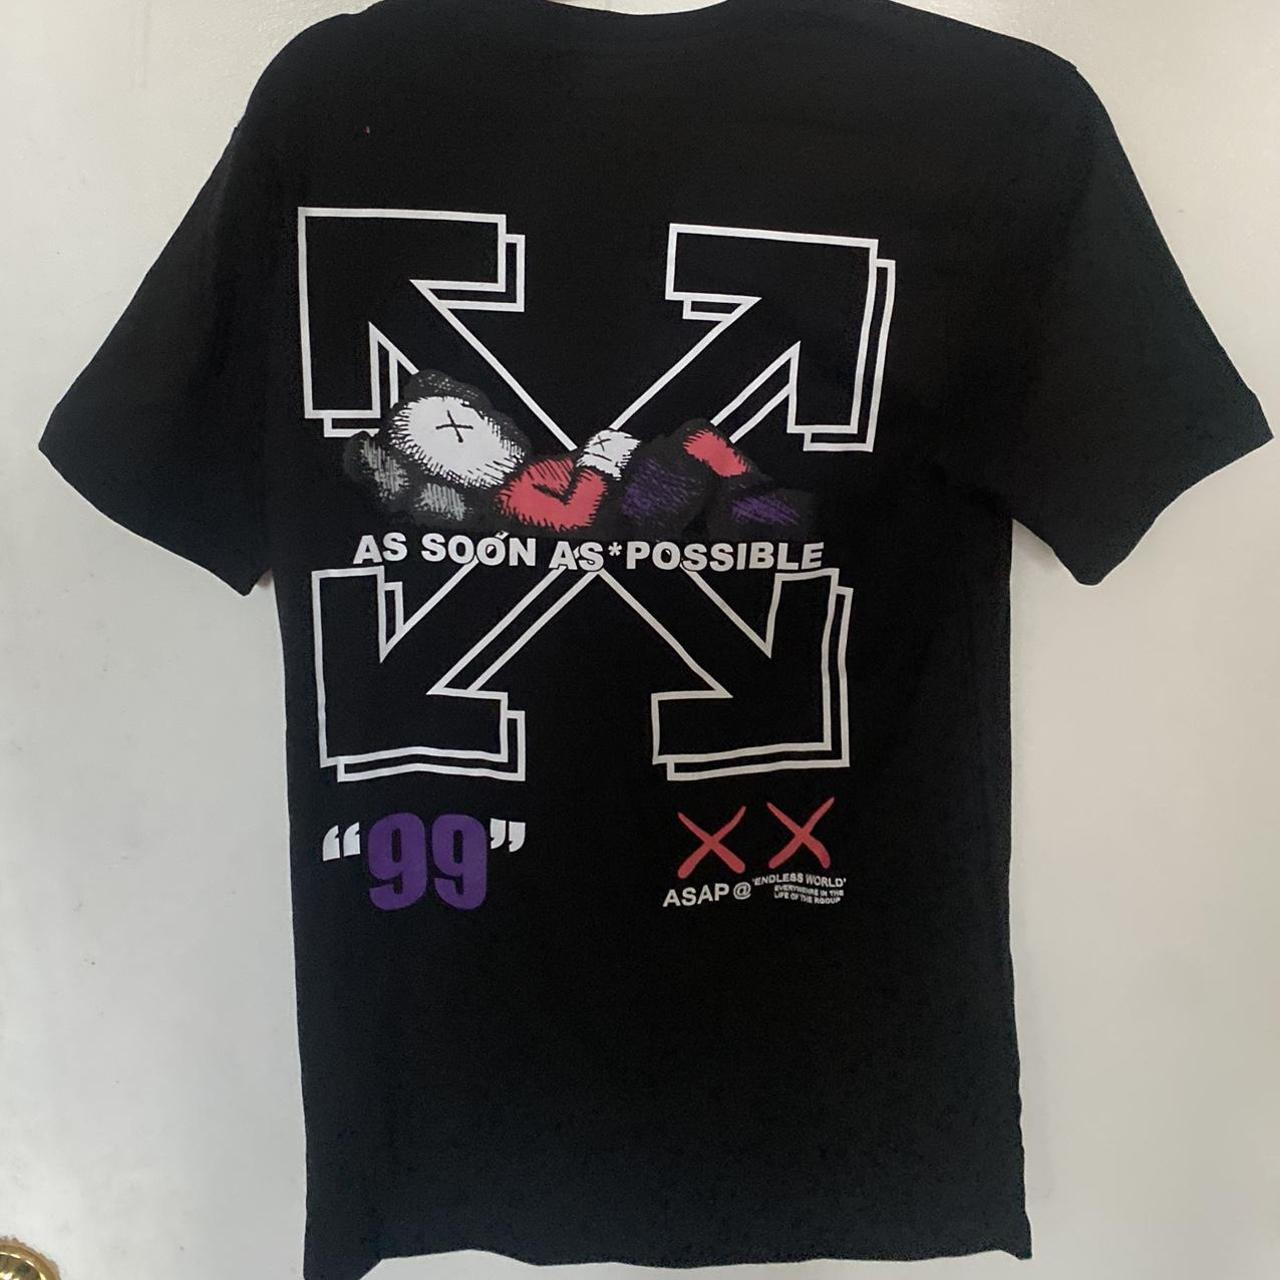 Off-White Men's Black and Red T-shirt (2)